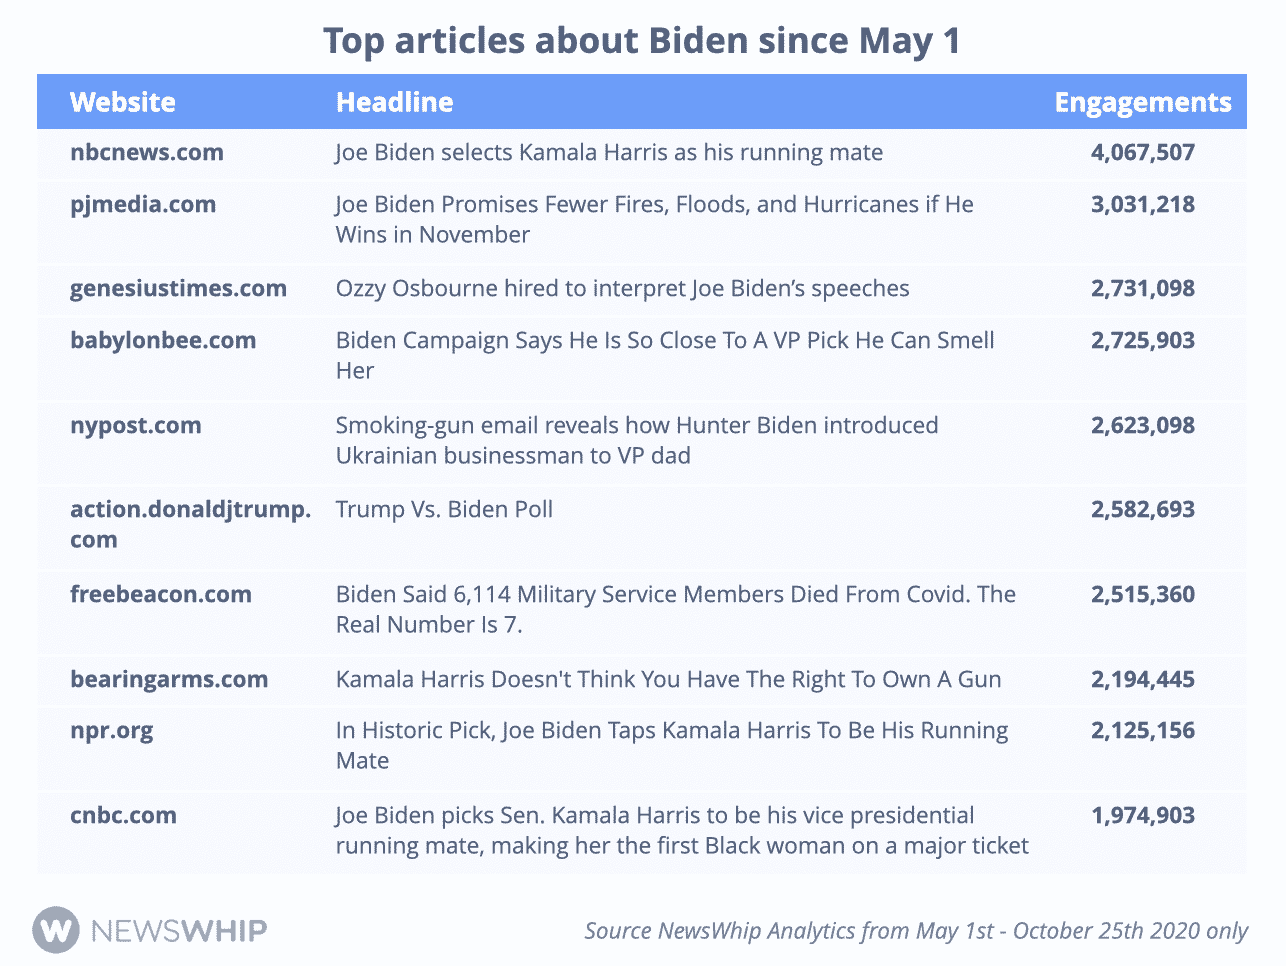 Chart showing the most engaged stories about Joe Biden in 2020, ranked by engagement